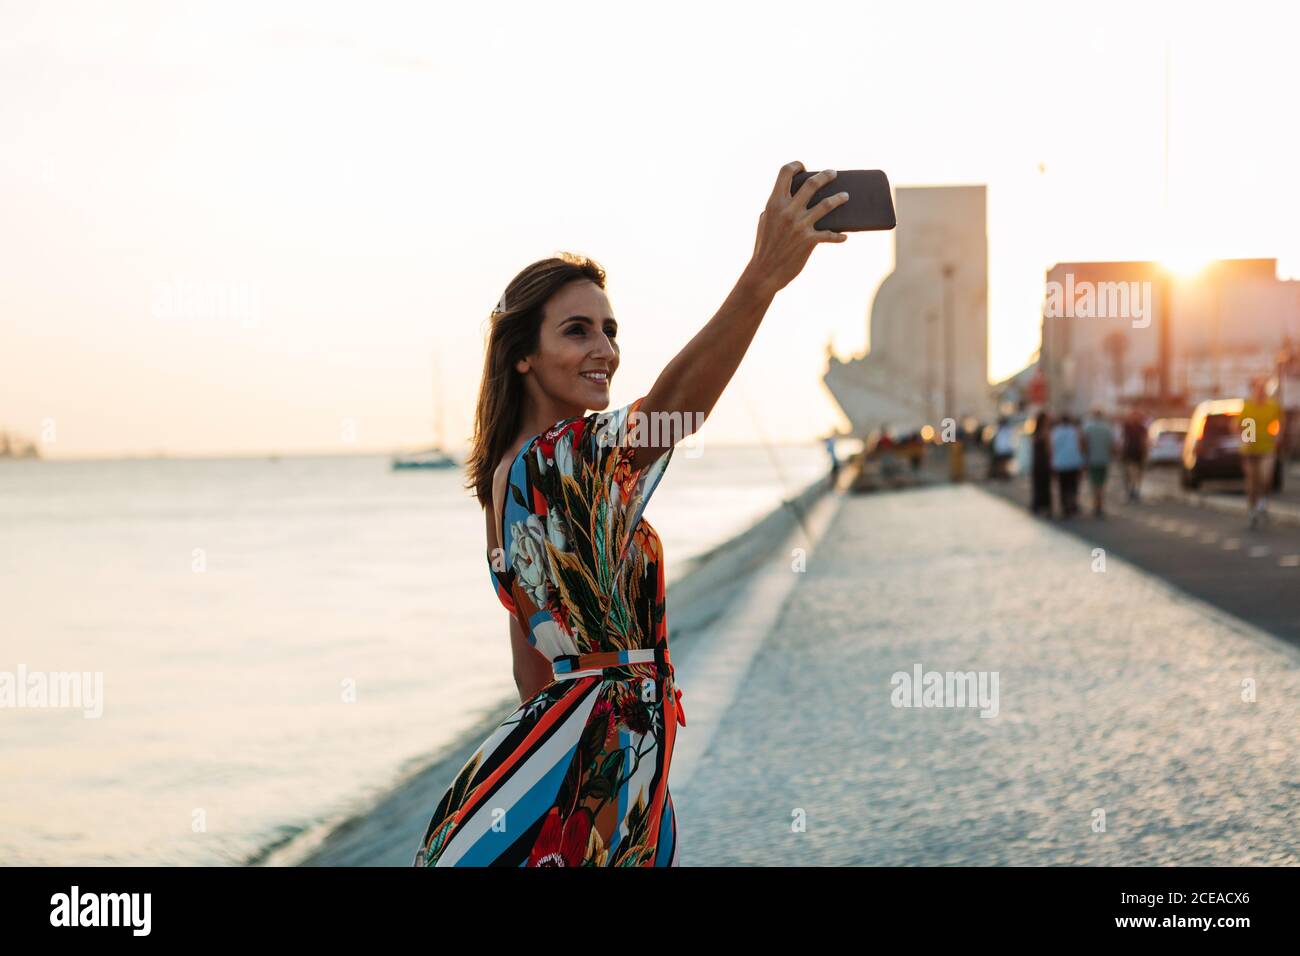 Content Woman in dress using phone and taking selfie on seafront in sunset time Stock Photo